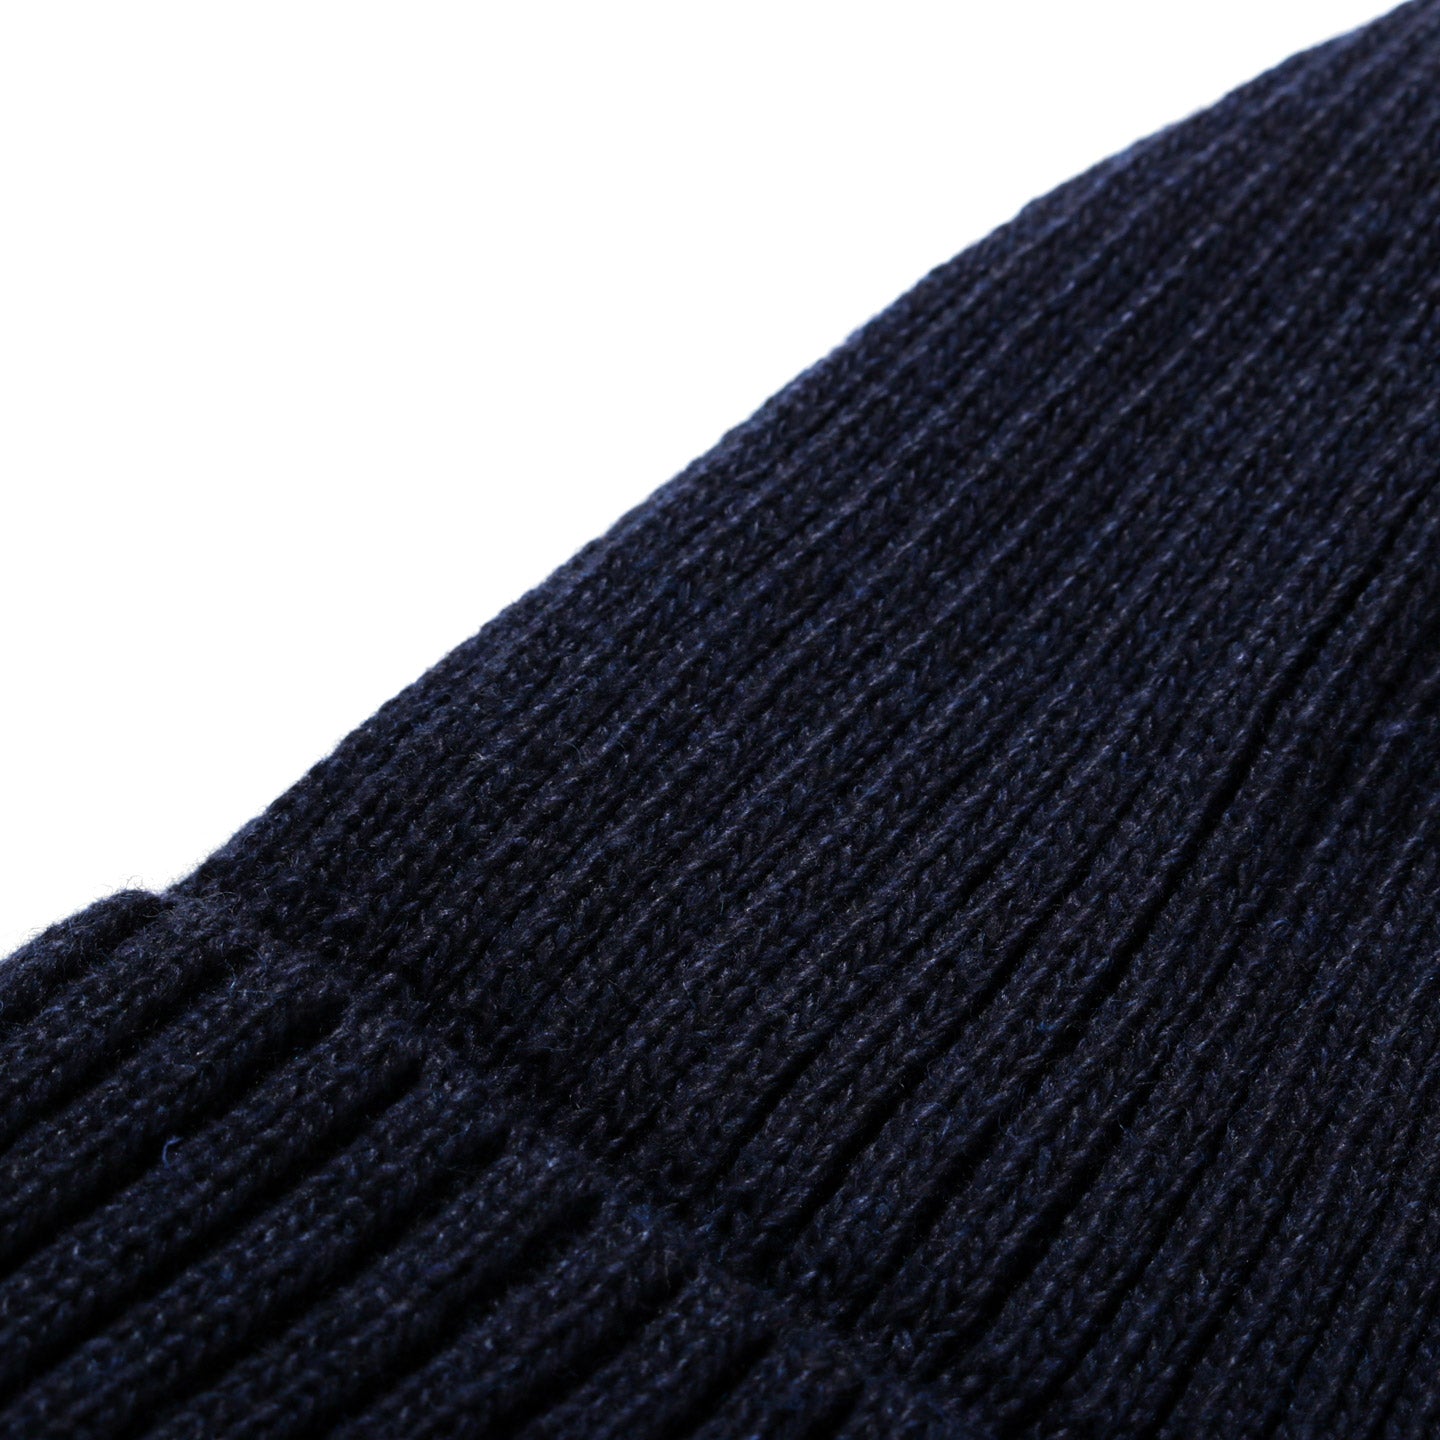 ROTOTO RECYCLED WOOL / POLYESTER BEANIE NAVY